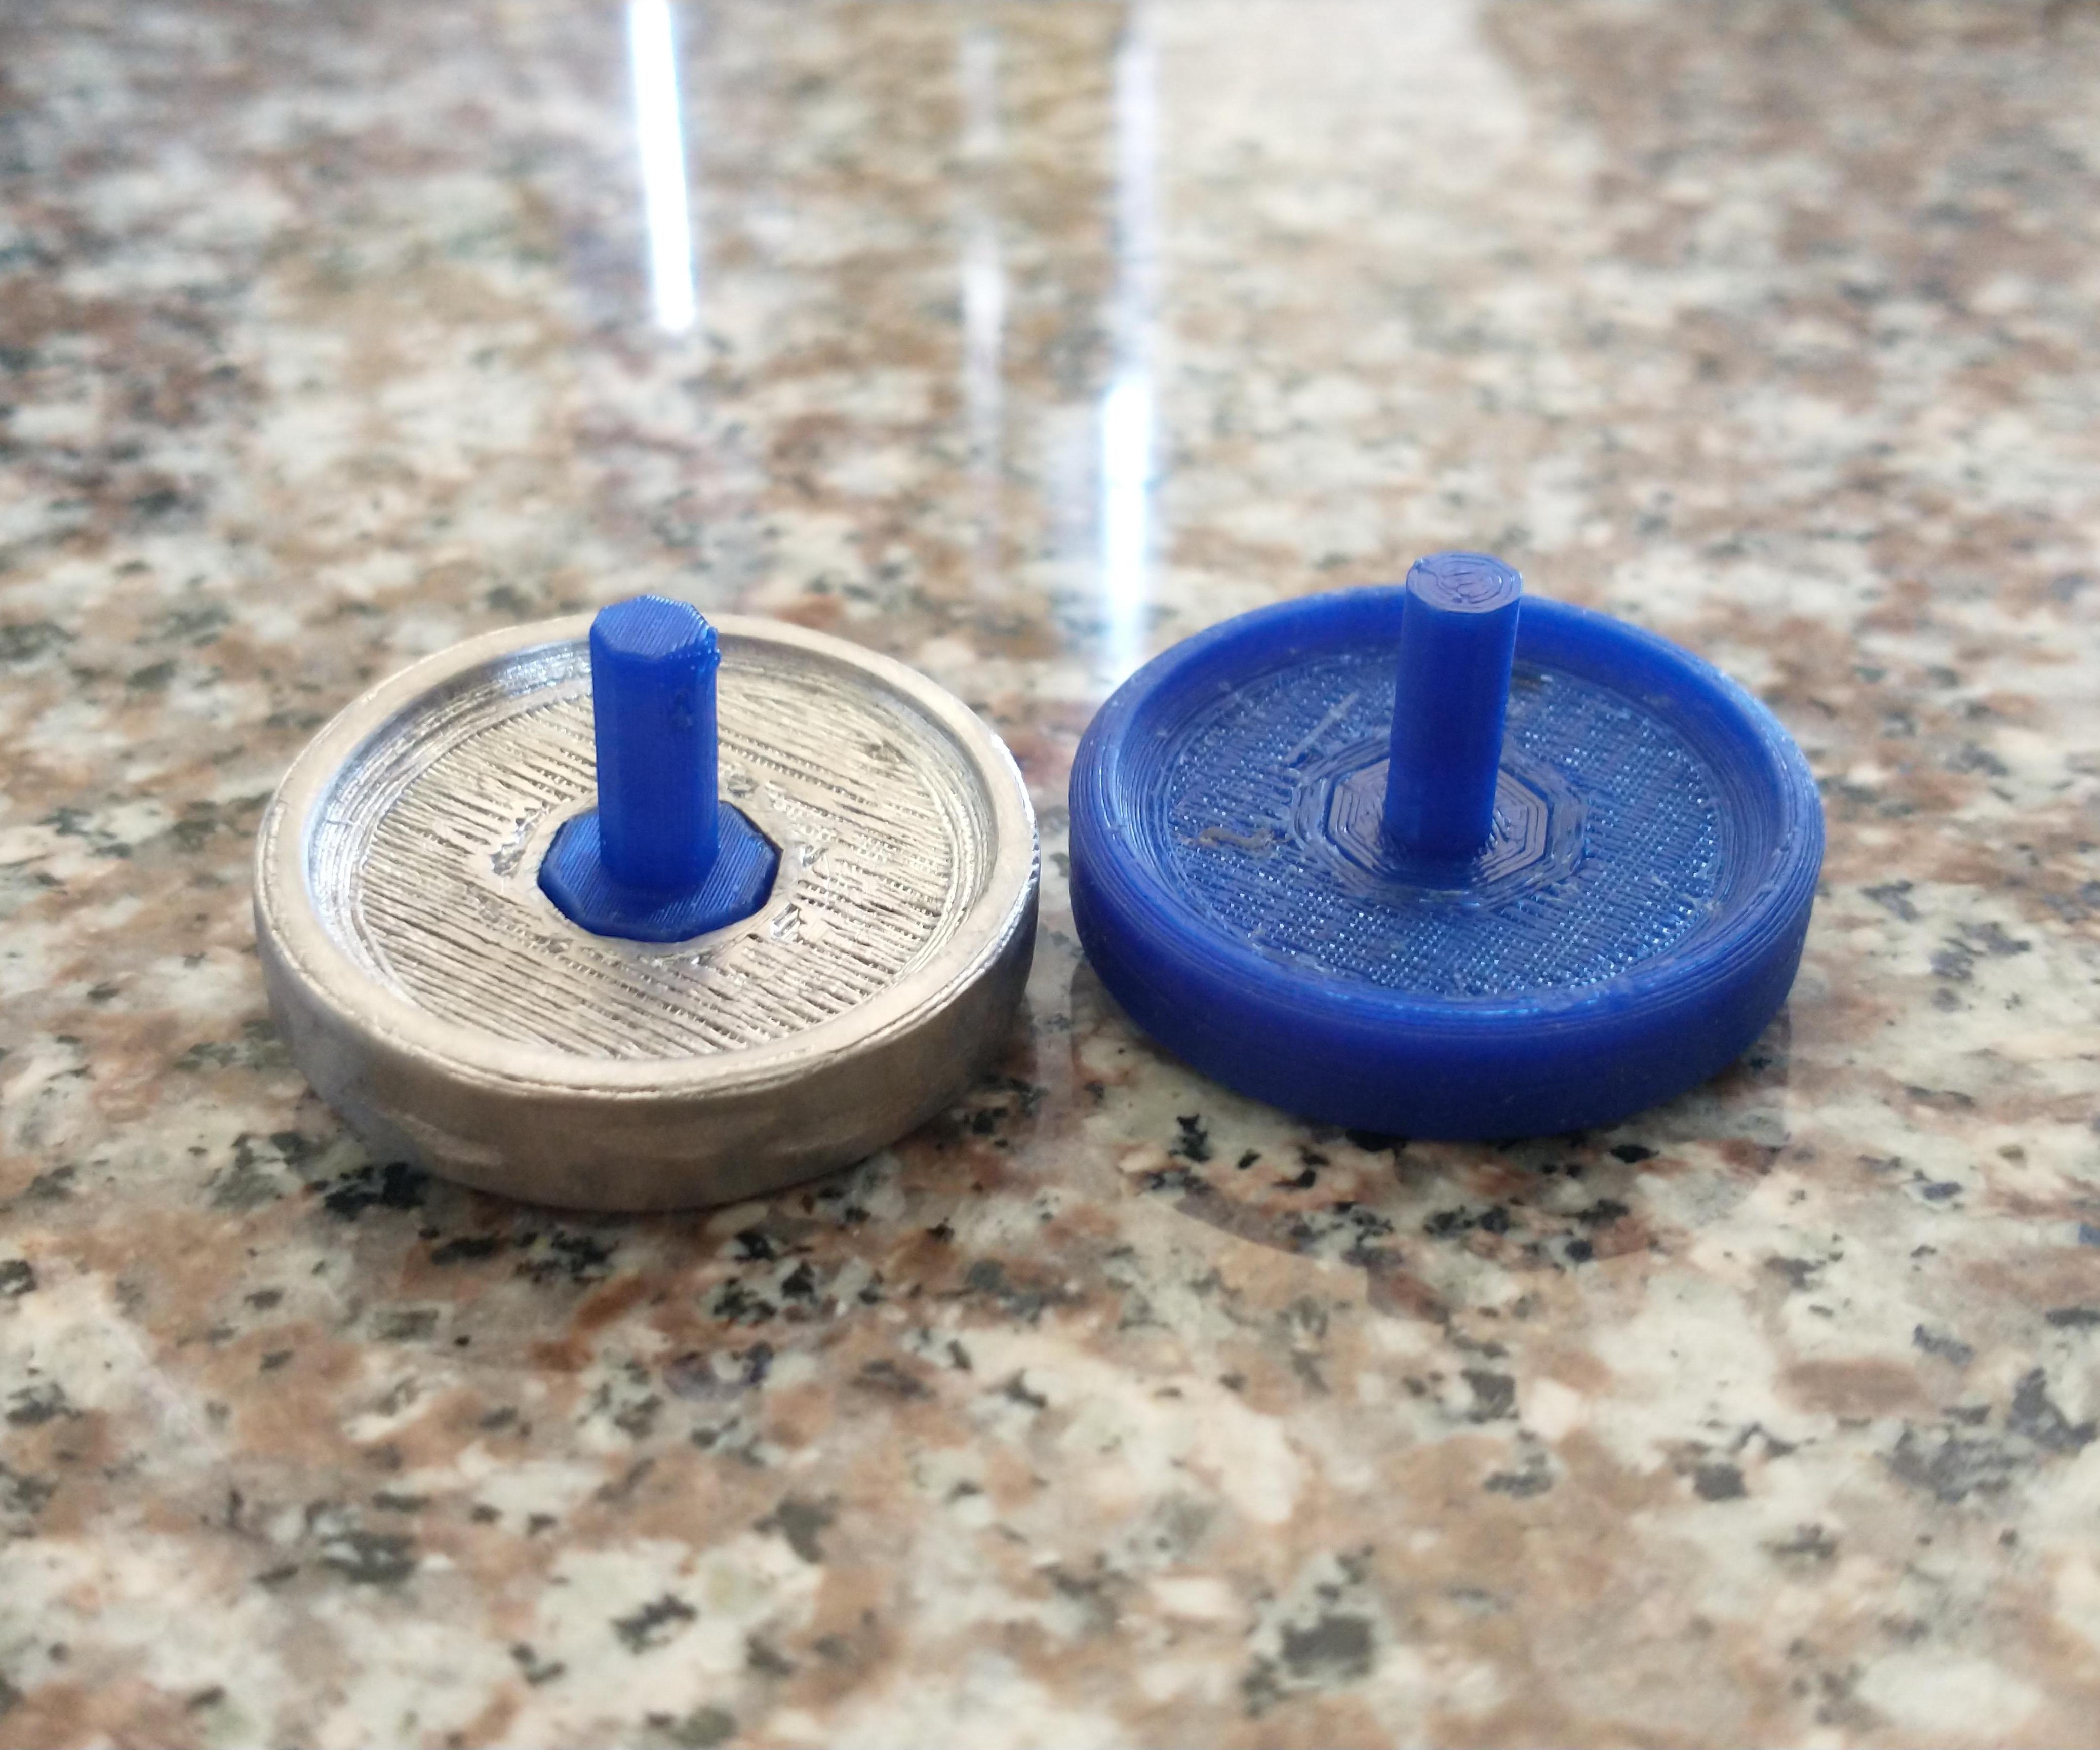 Cast a Metal Spinning Top That Spins for 7+ Minutes